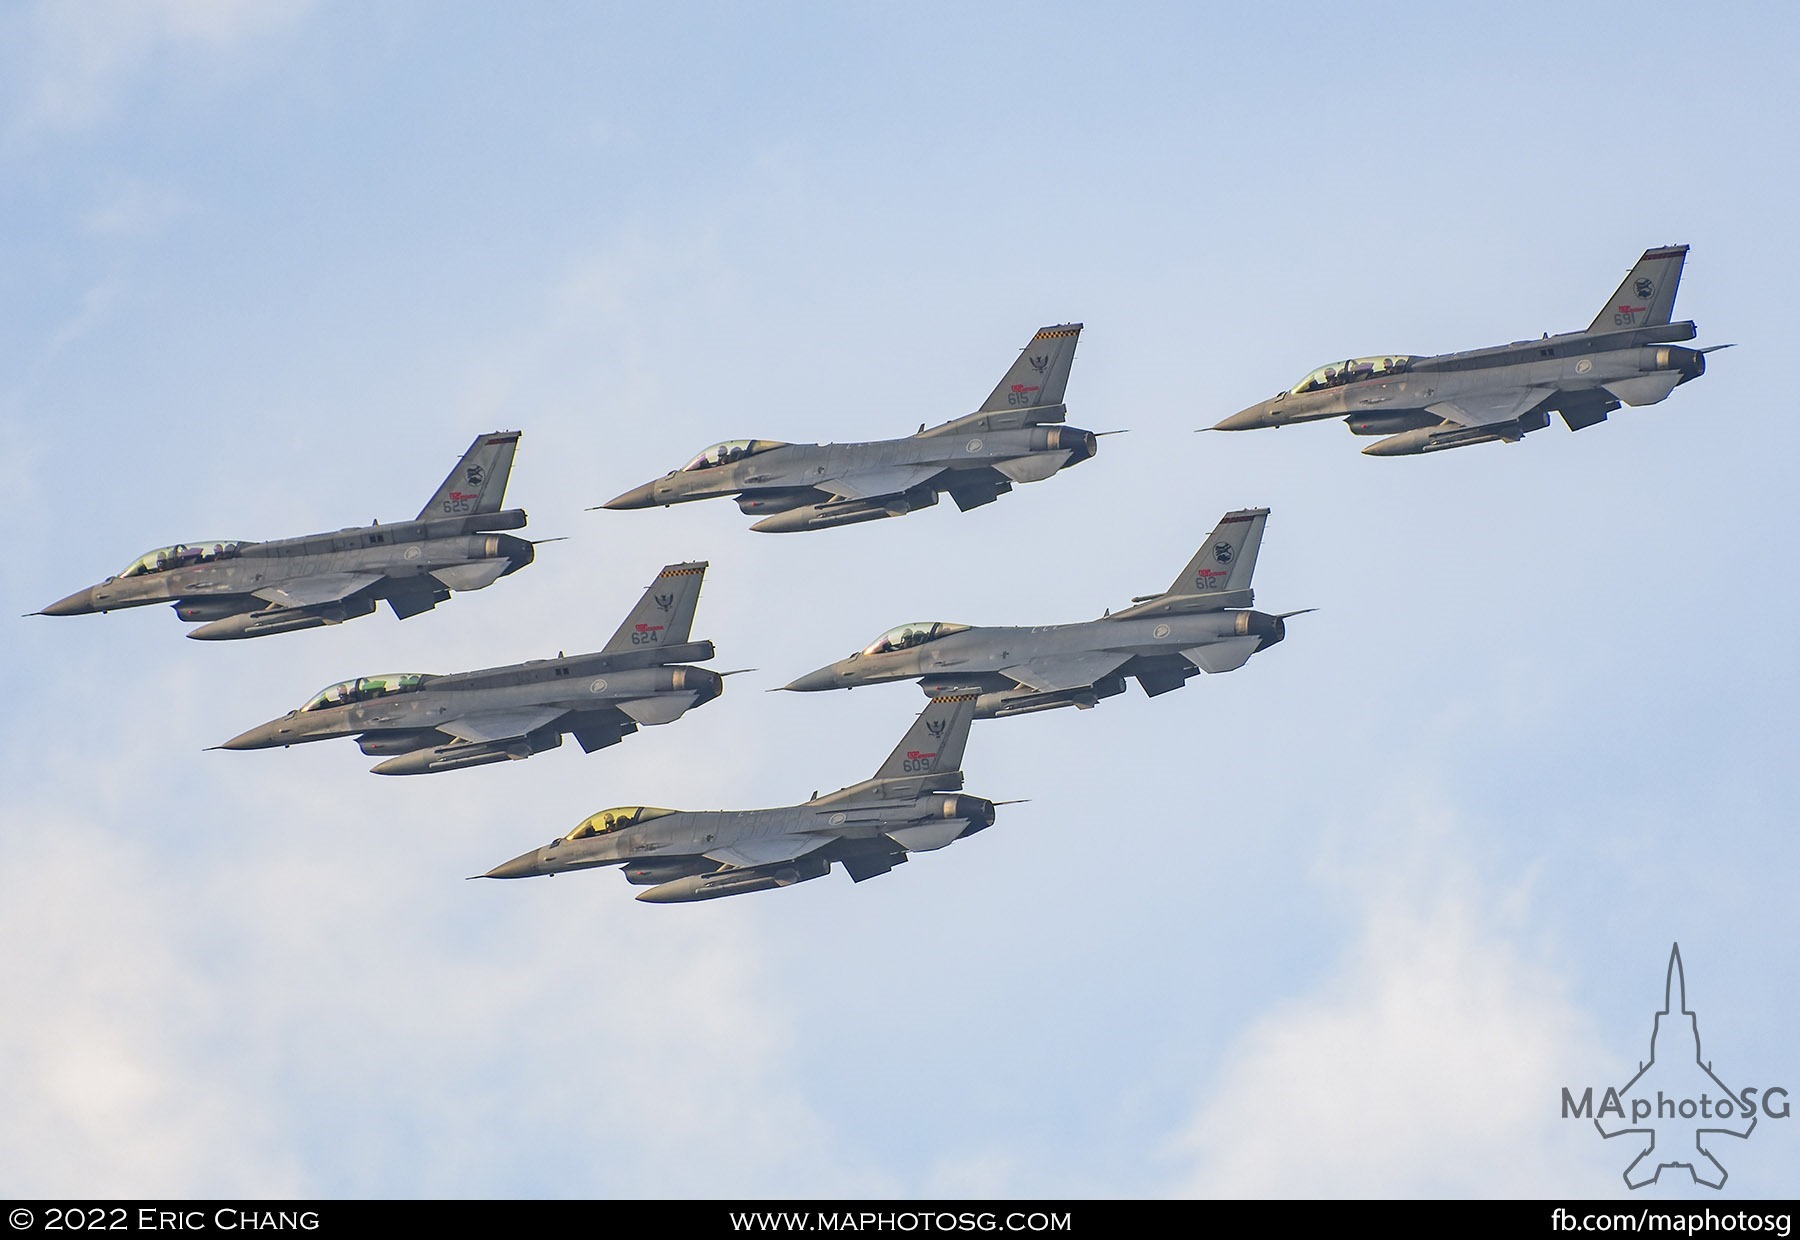 6 F-16C/Ds performed a formation flypast around the island.